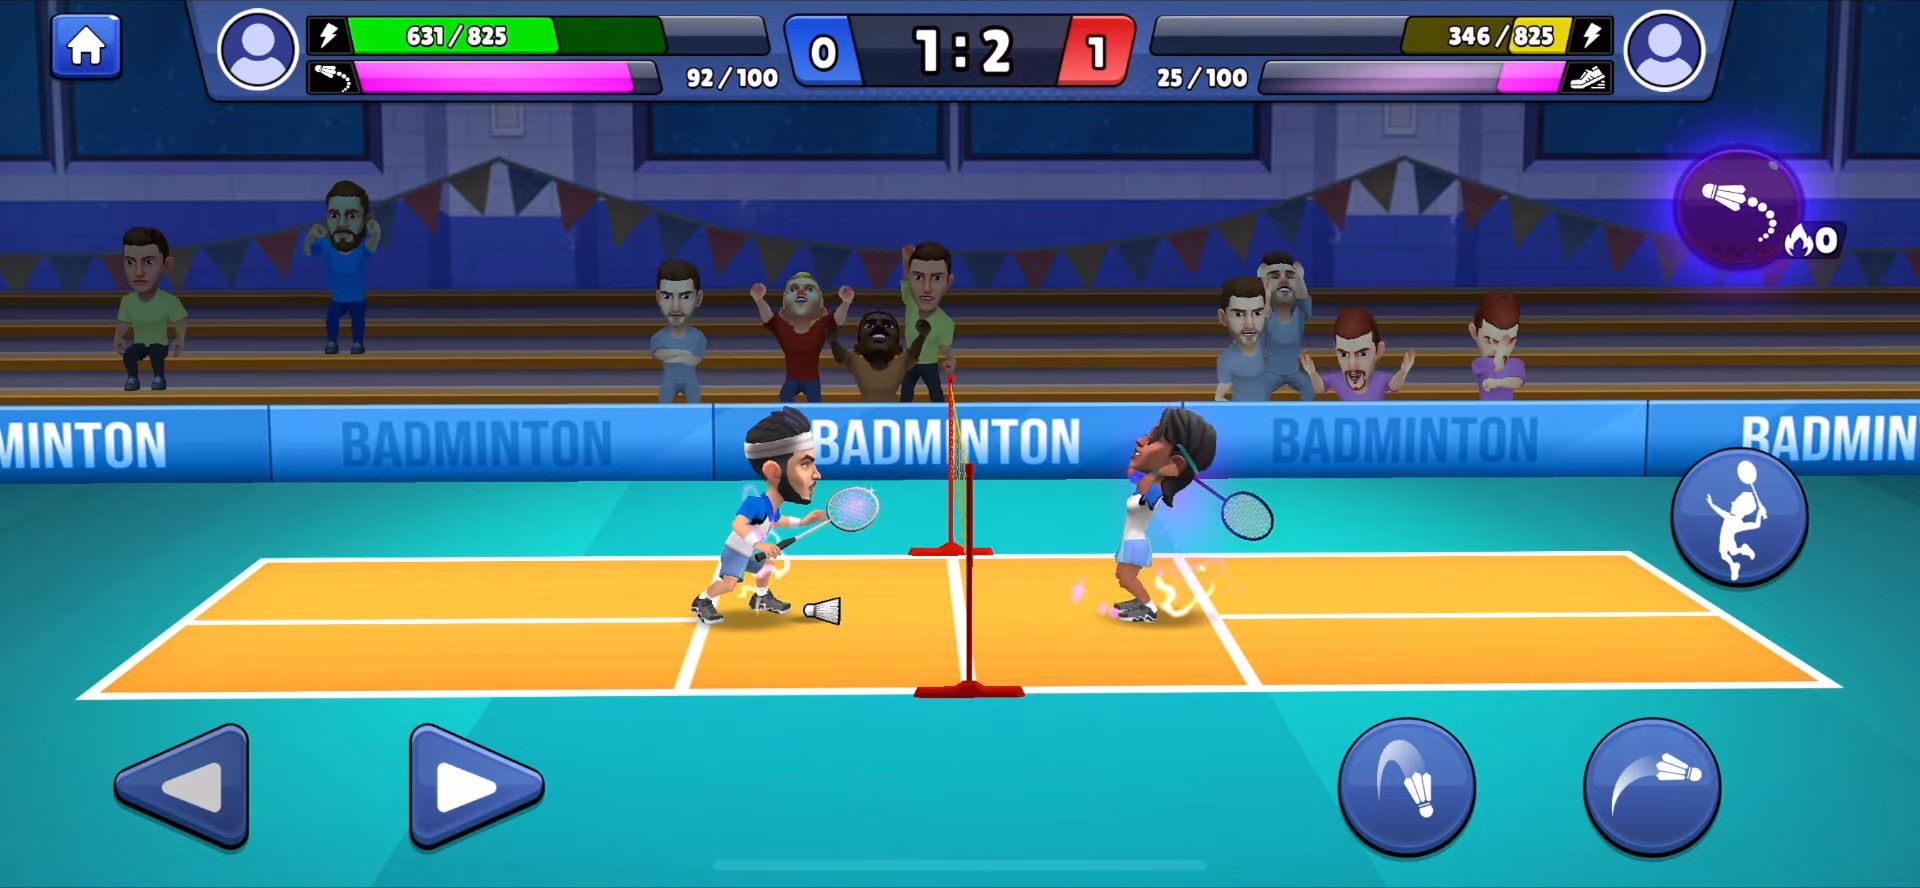 Full version of Android PvP game apk Badminton Clash 3D for tablet and phone.